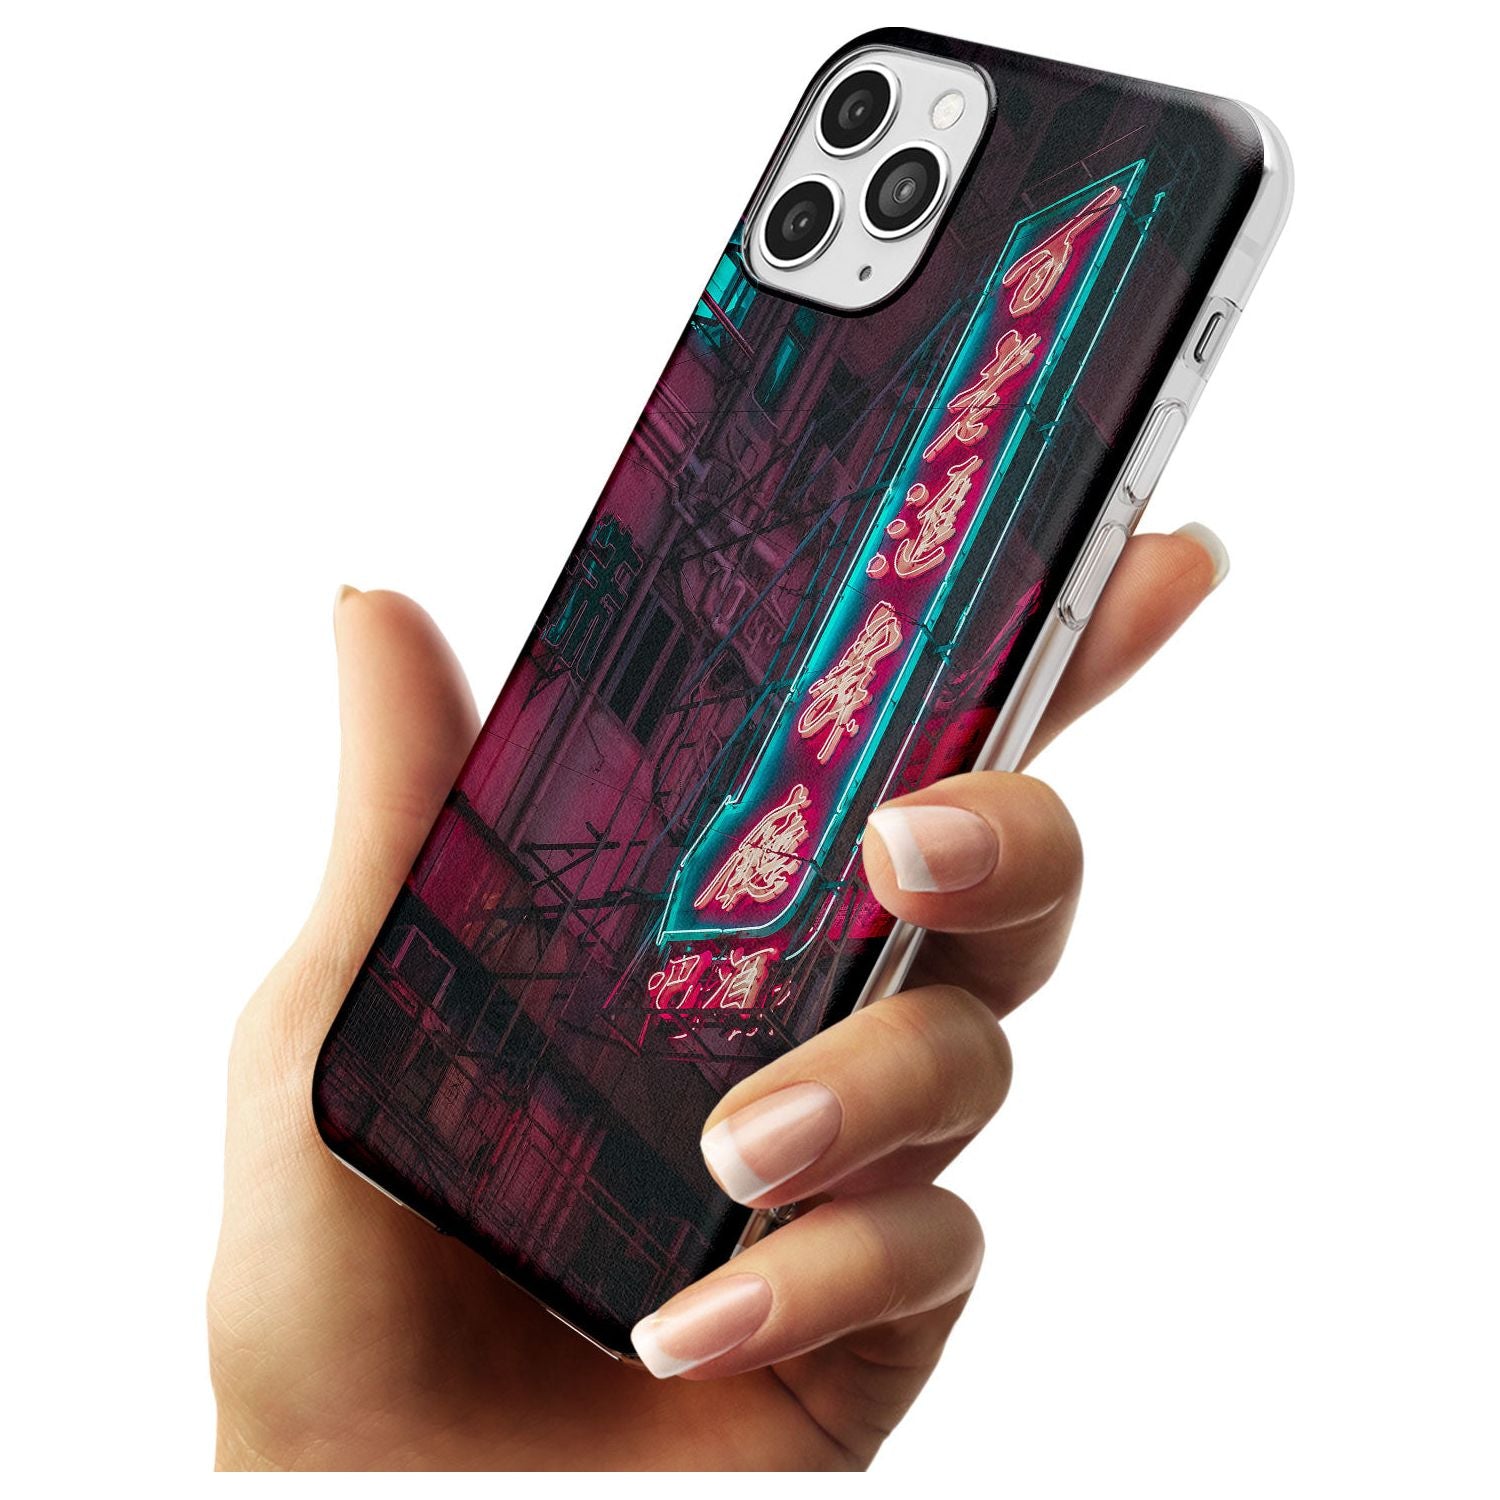 Large Kanji Sign - Neon Cities Photographs Slim TPU Phone Case for iPhone 11 Pro Max